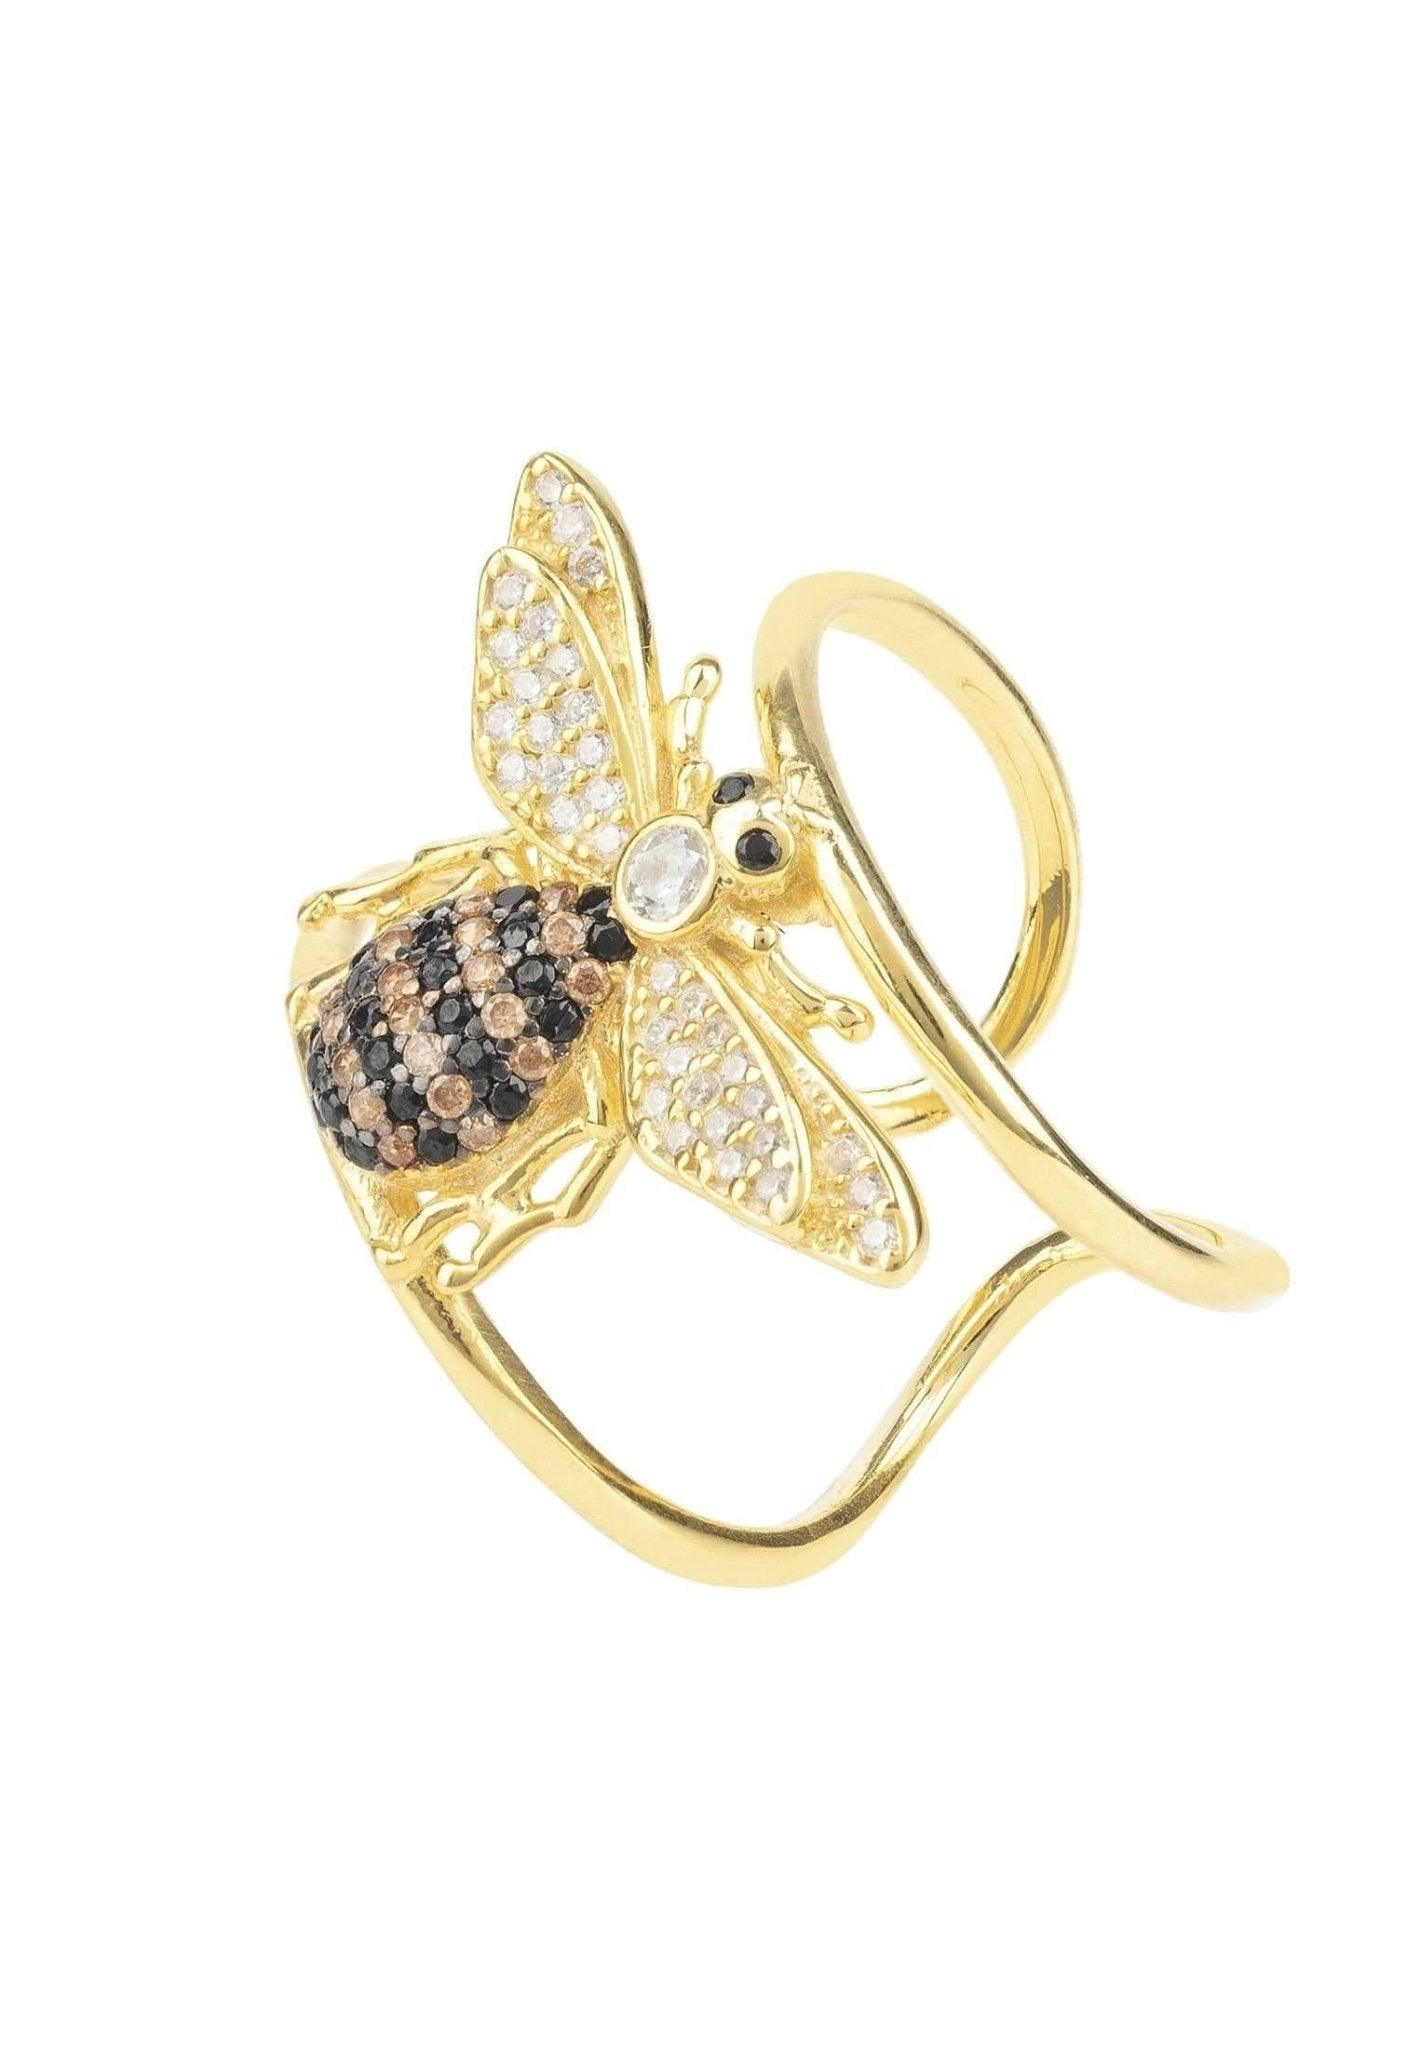 Honey Bee Cocktail Ring Adjustable, Gold Plate